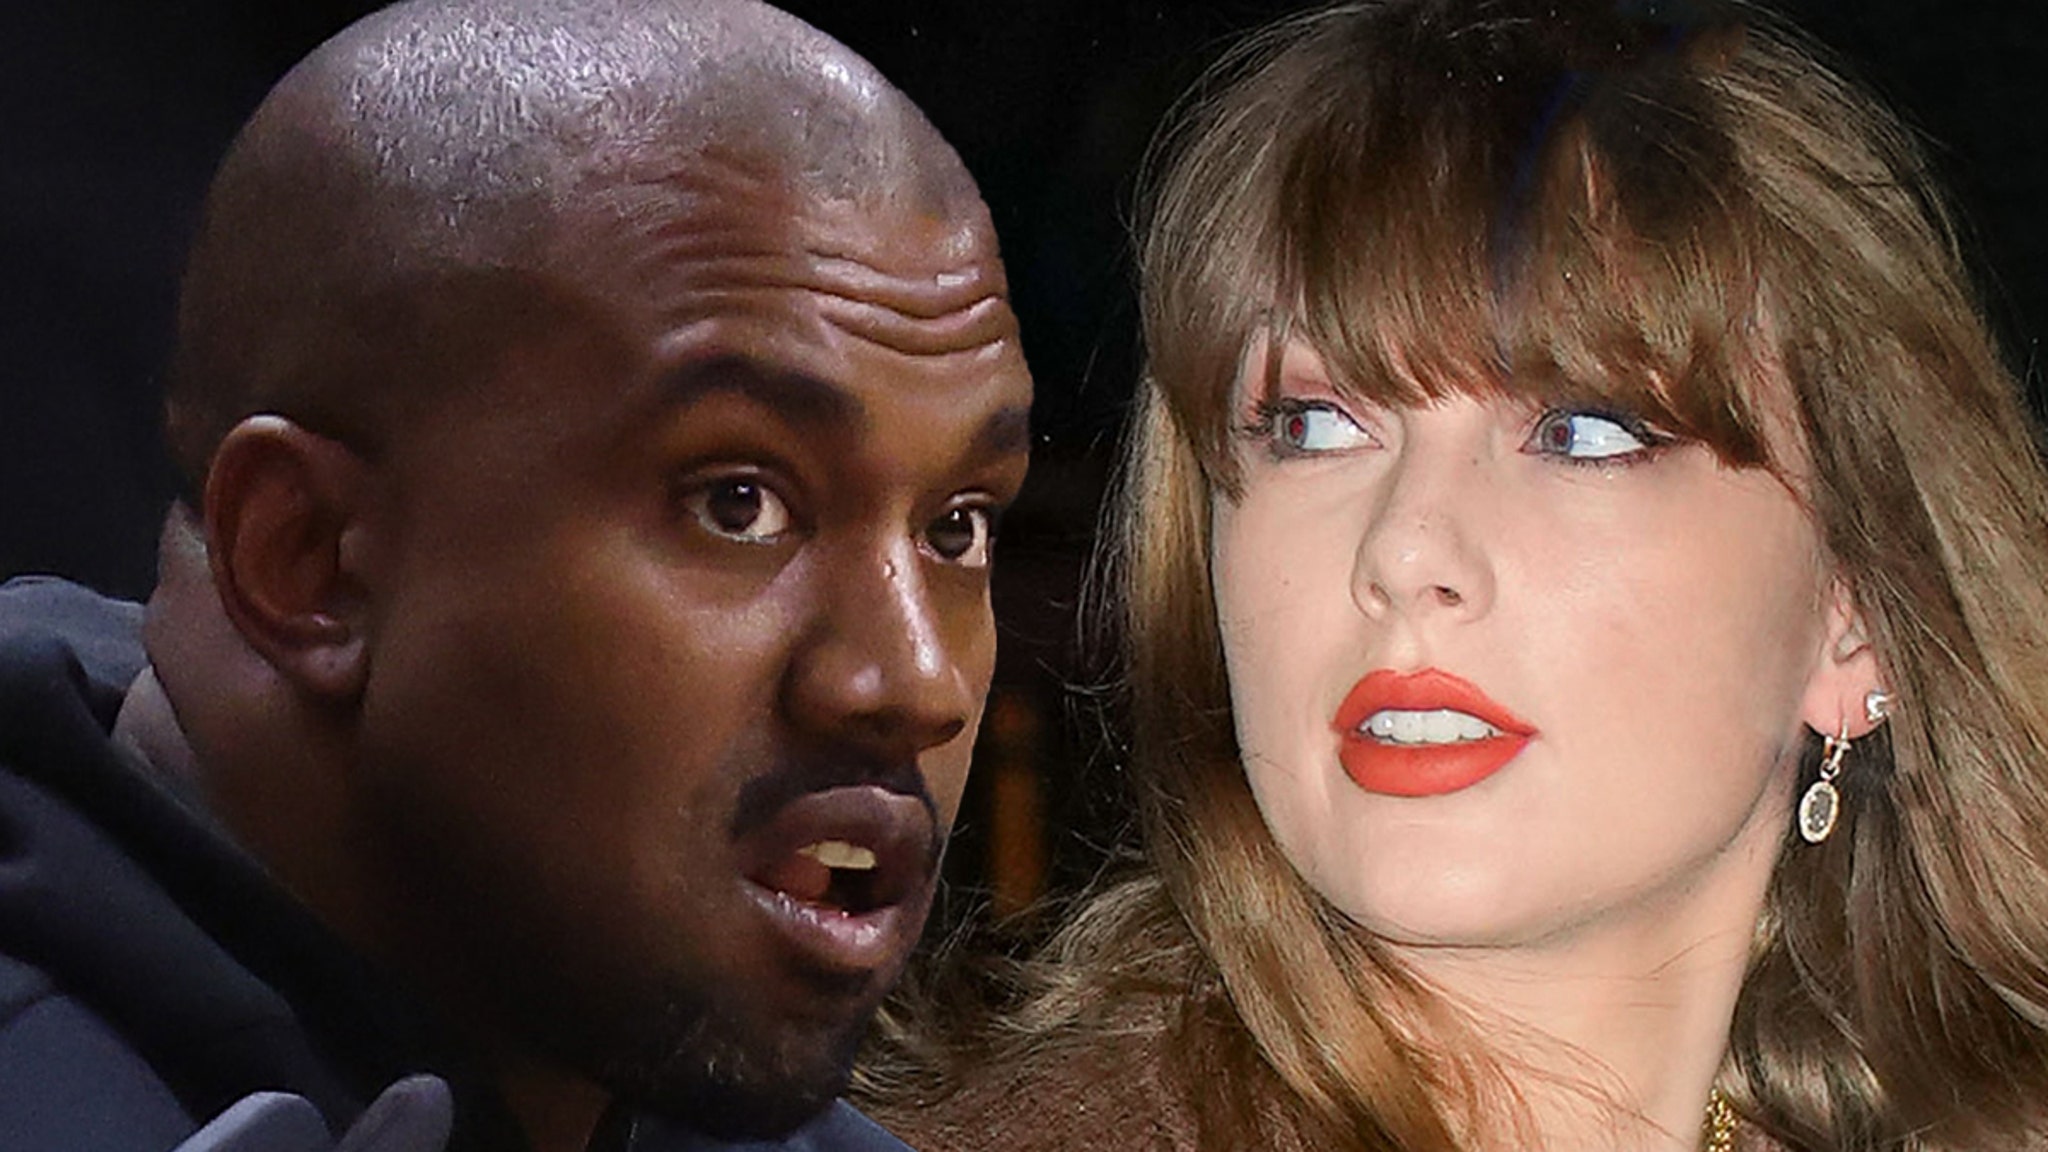 Kanye West Fires Back At Swifties, Claims He’s Helped Taylor More Than Hurt Her